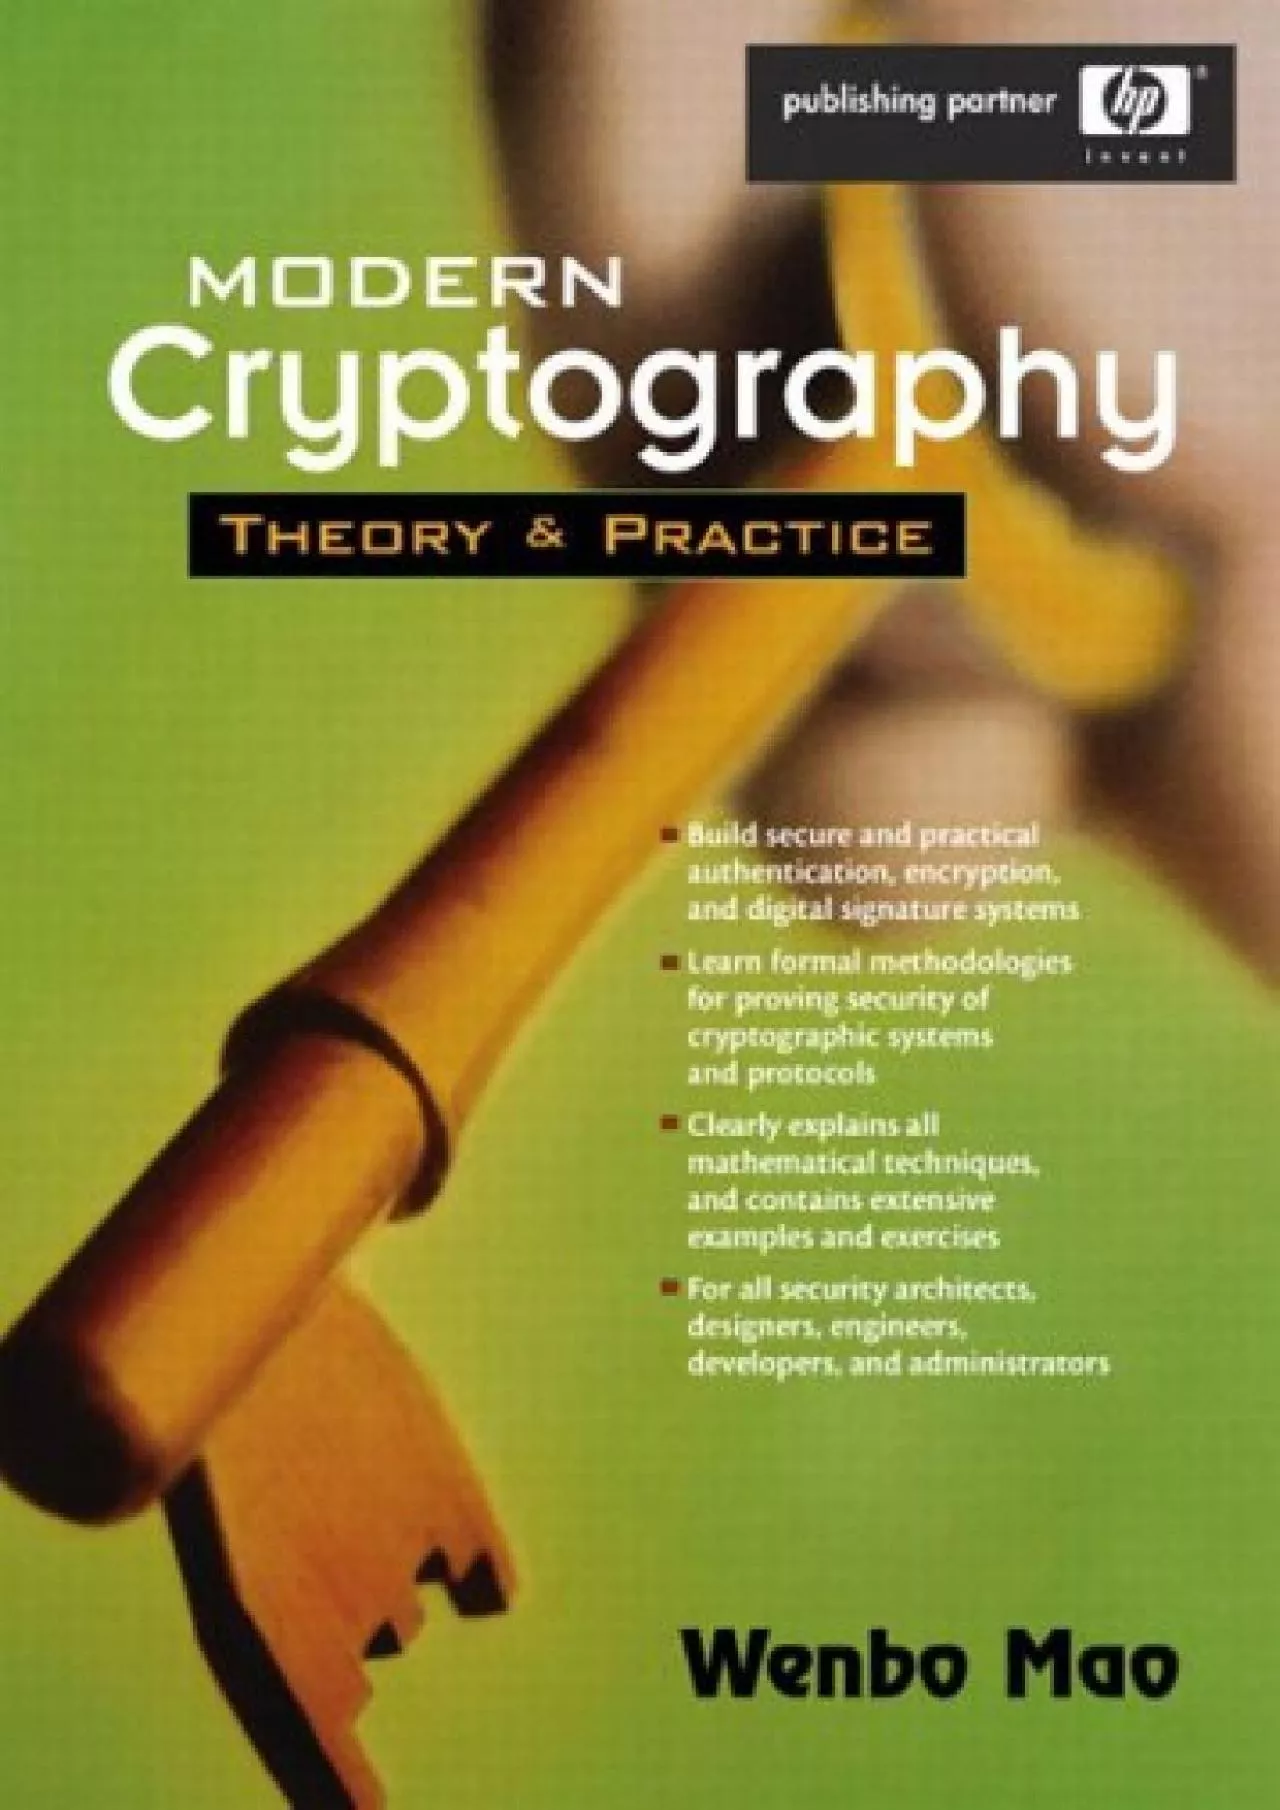 (EBOOK)-Modern Cryptography: Theory and Practice